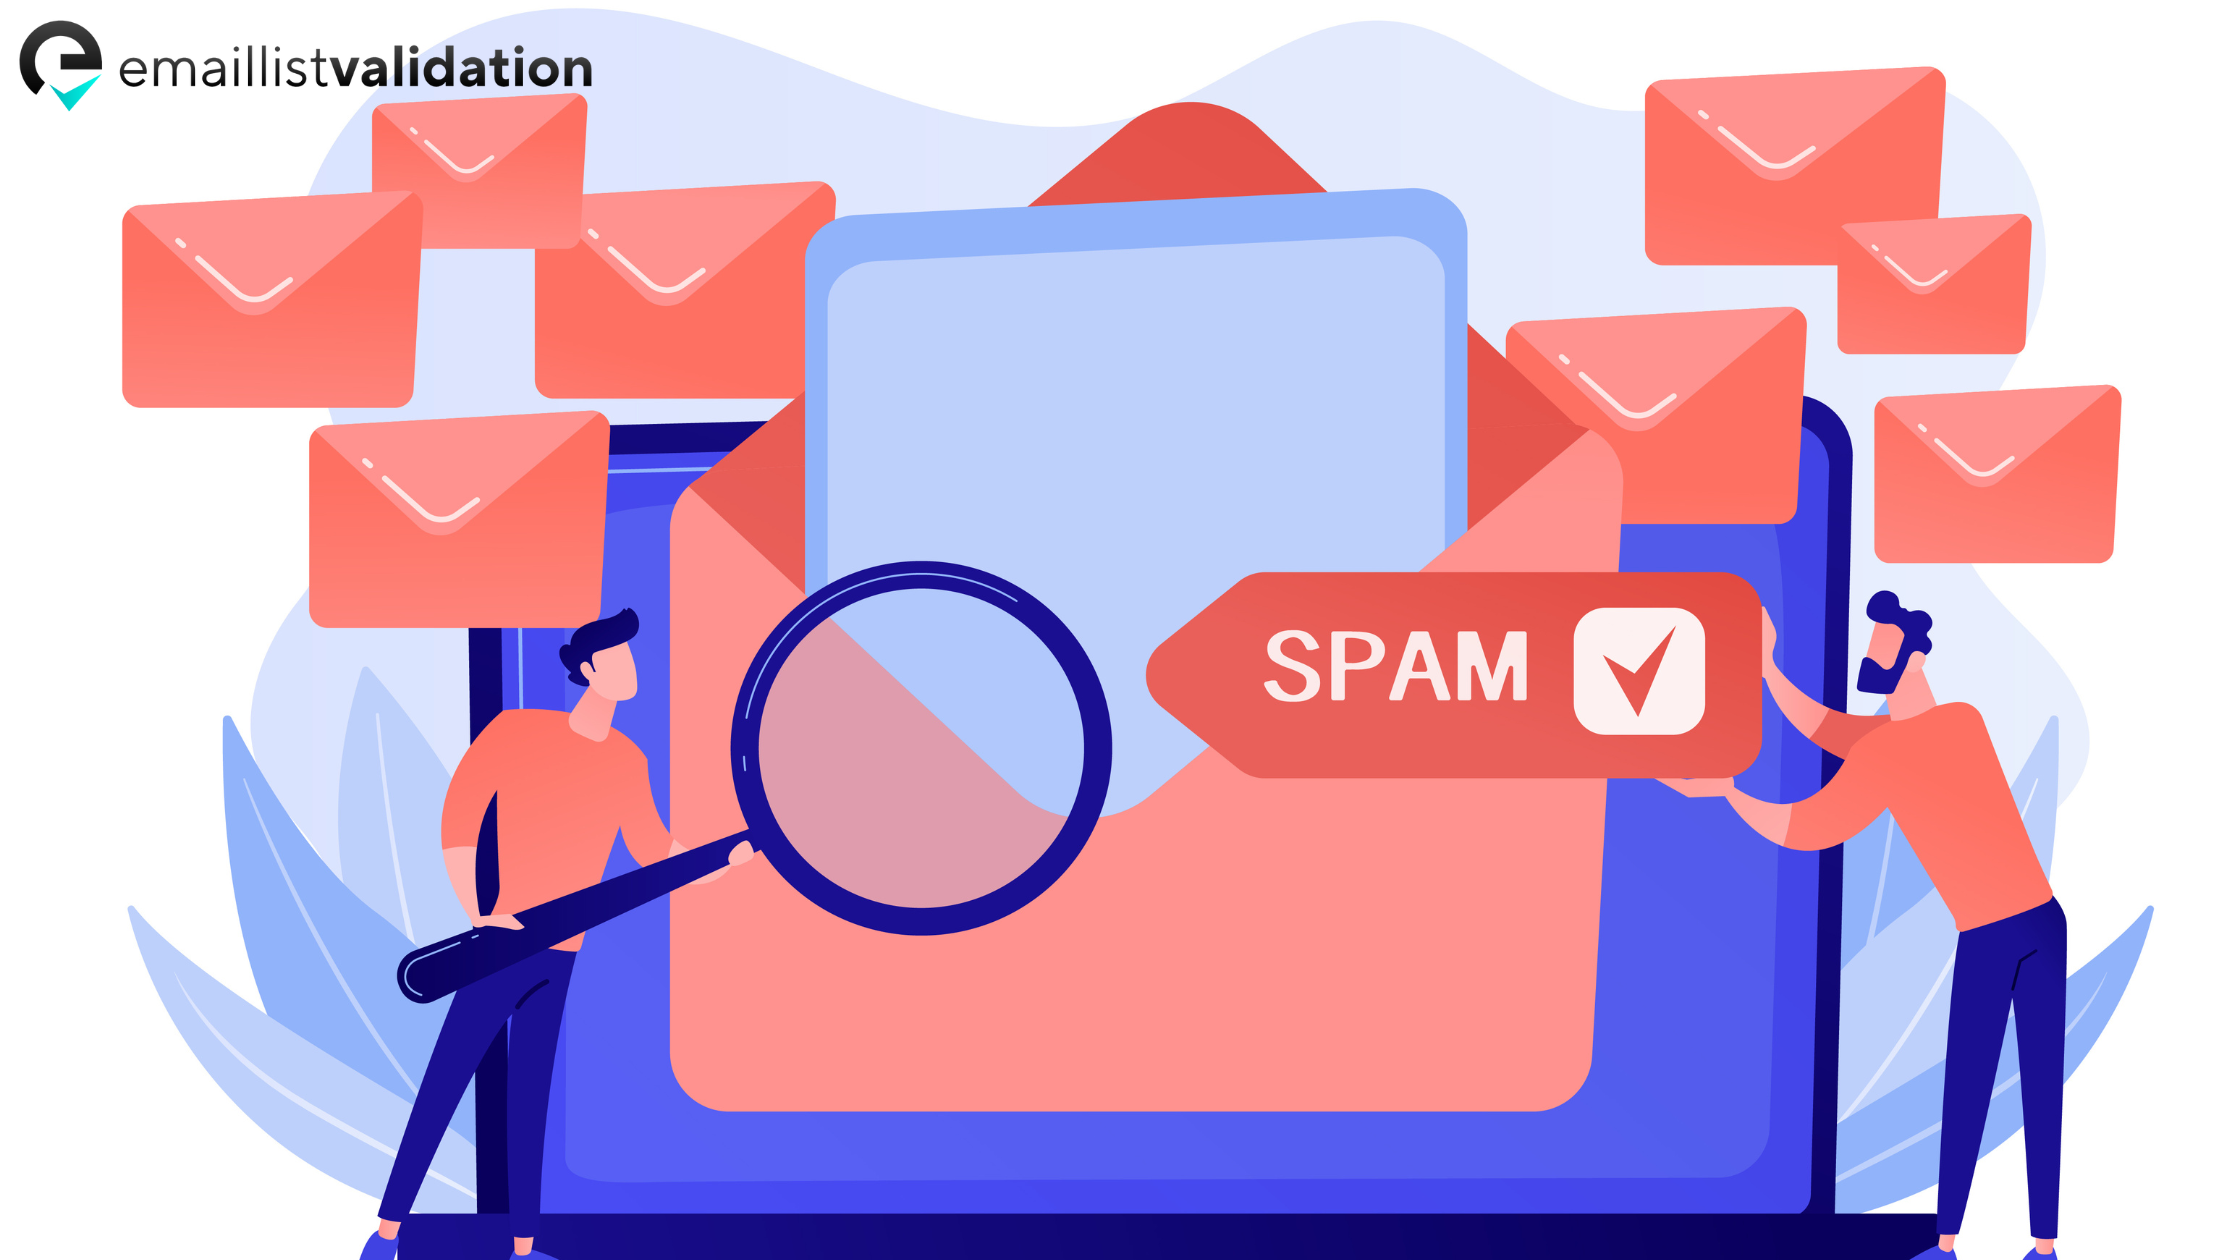 what are the current best practices for email verification